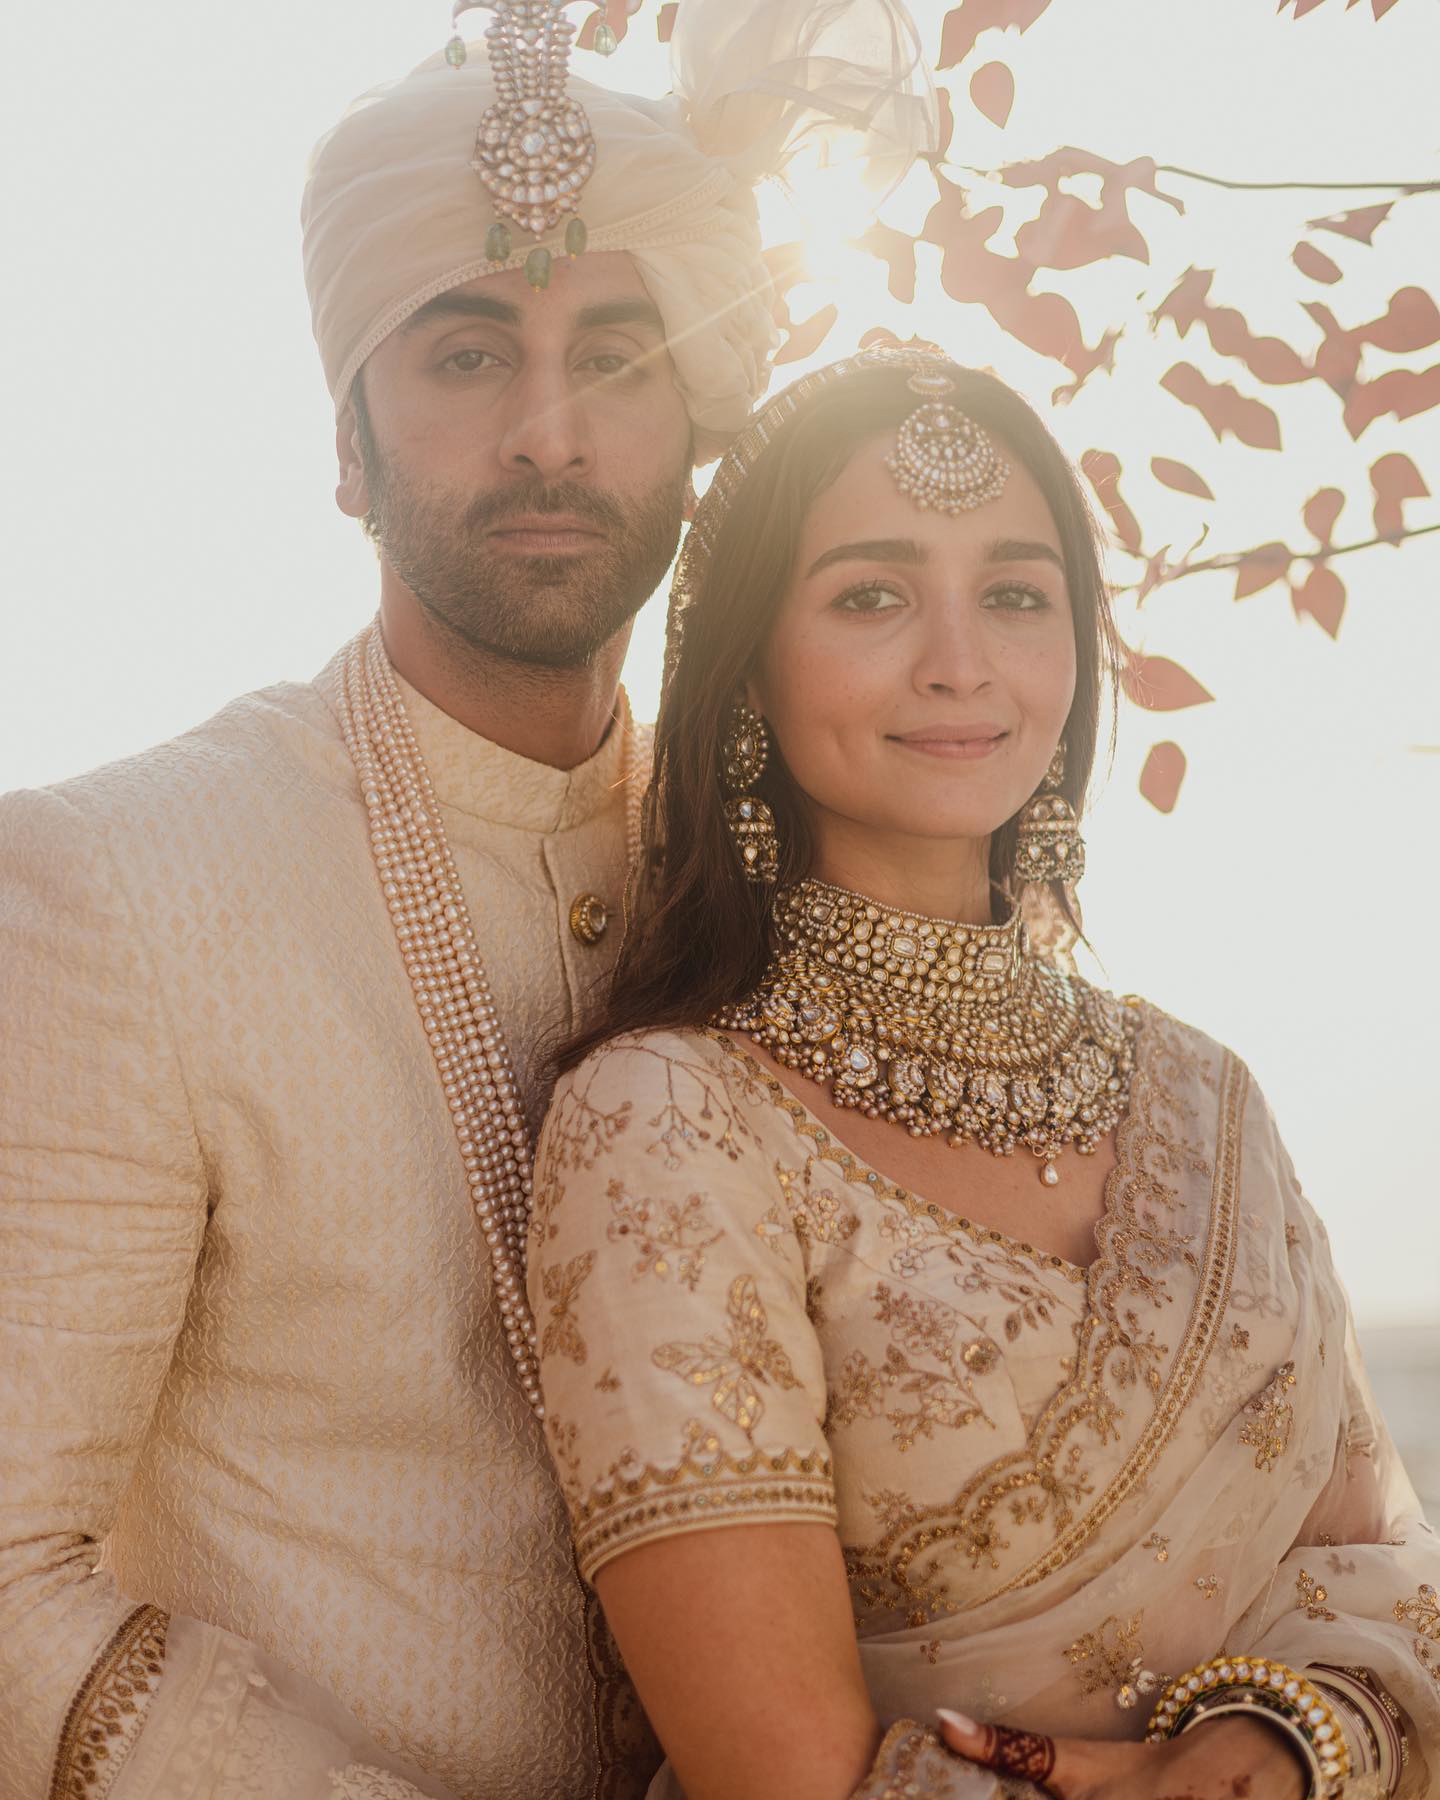 278451860 1379416399237258 649270736047423071 n Alia Bhatt's bodyguard shared a special picture of Alia's wedding, wrote, "From holding your little hands to watching you become a bride"